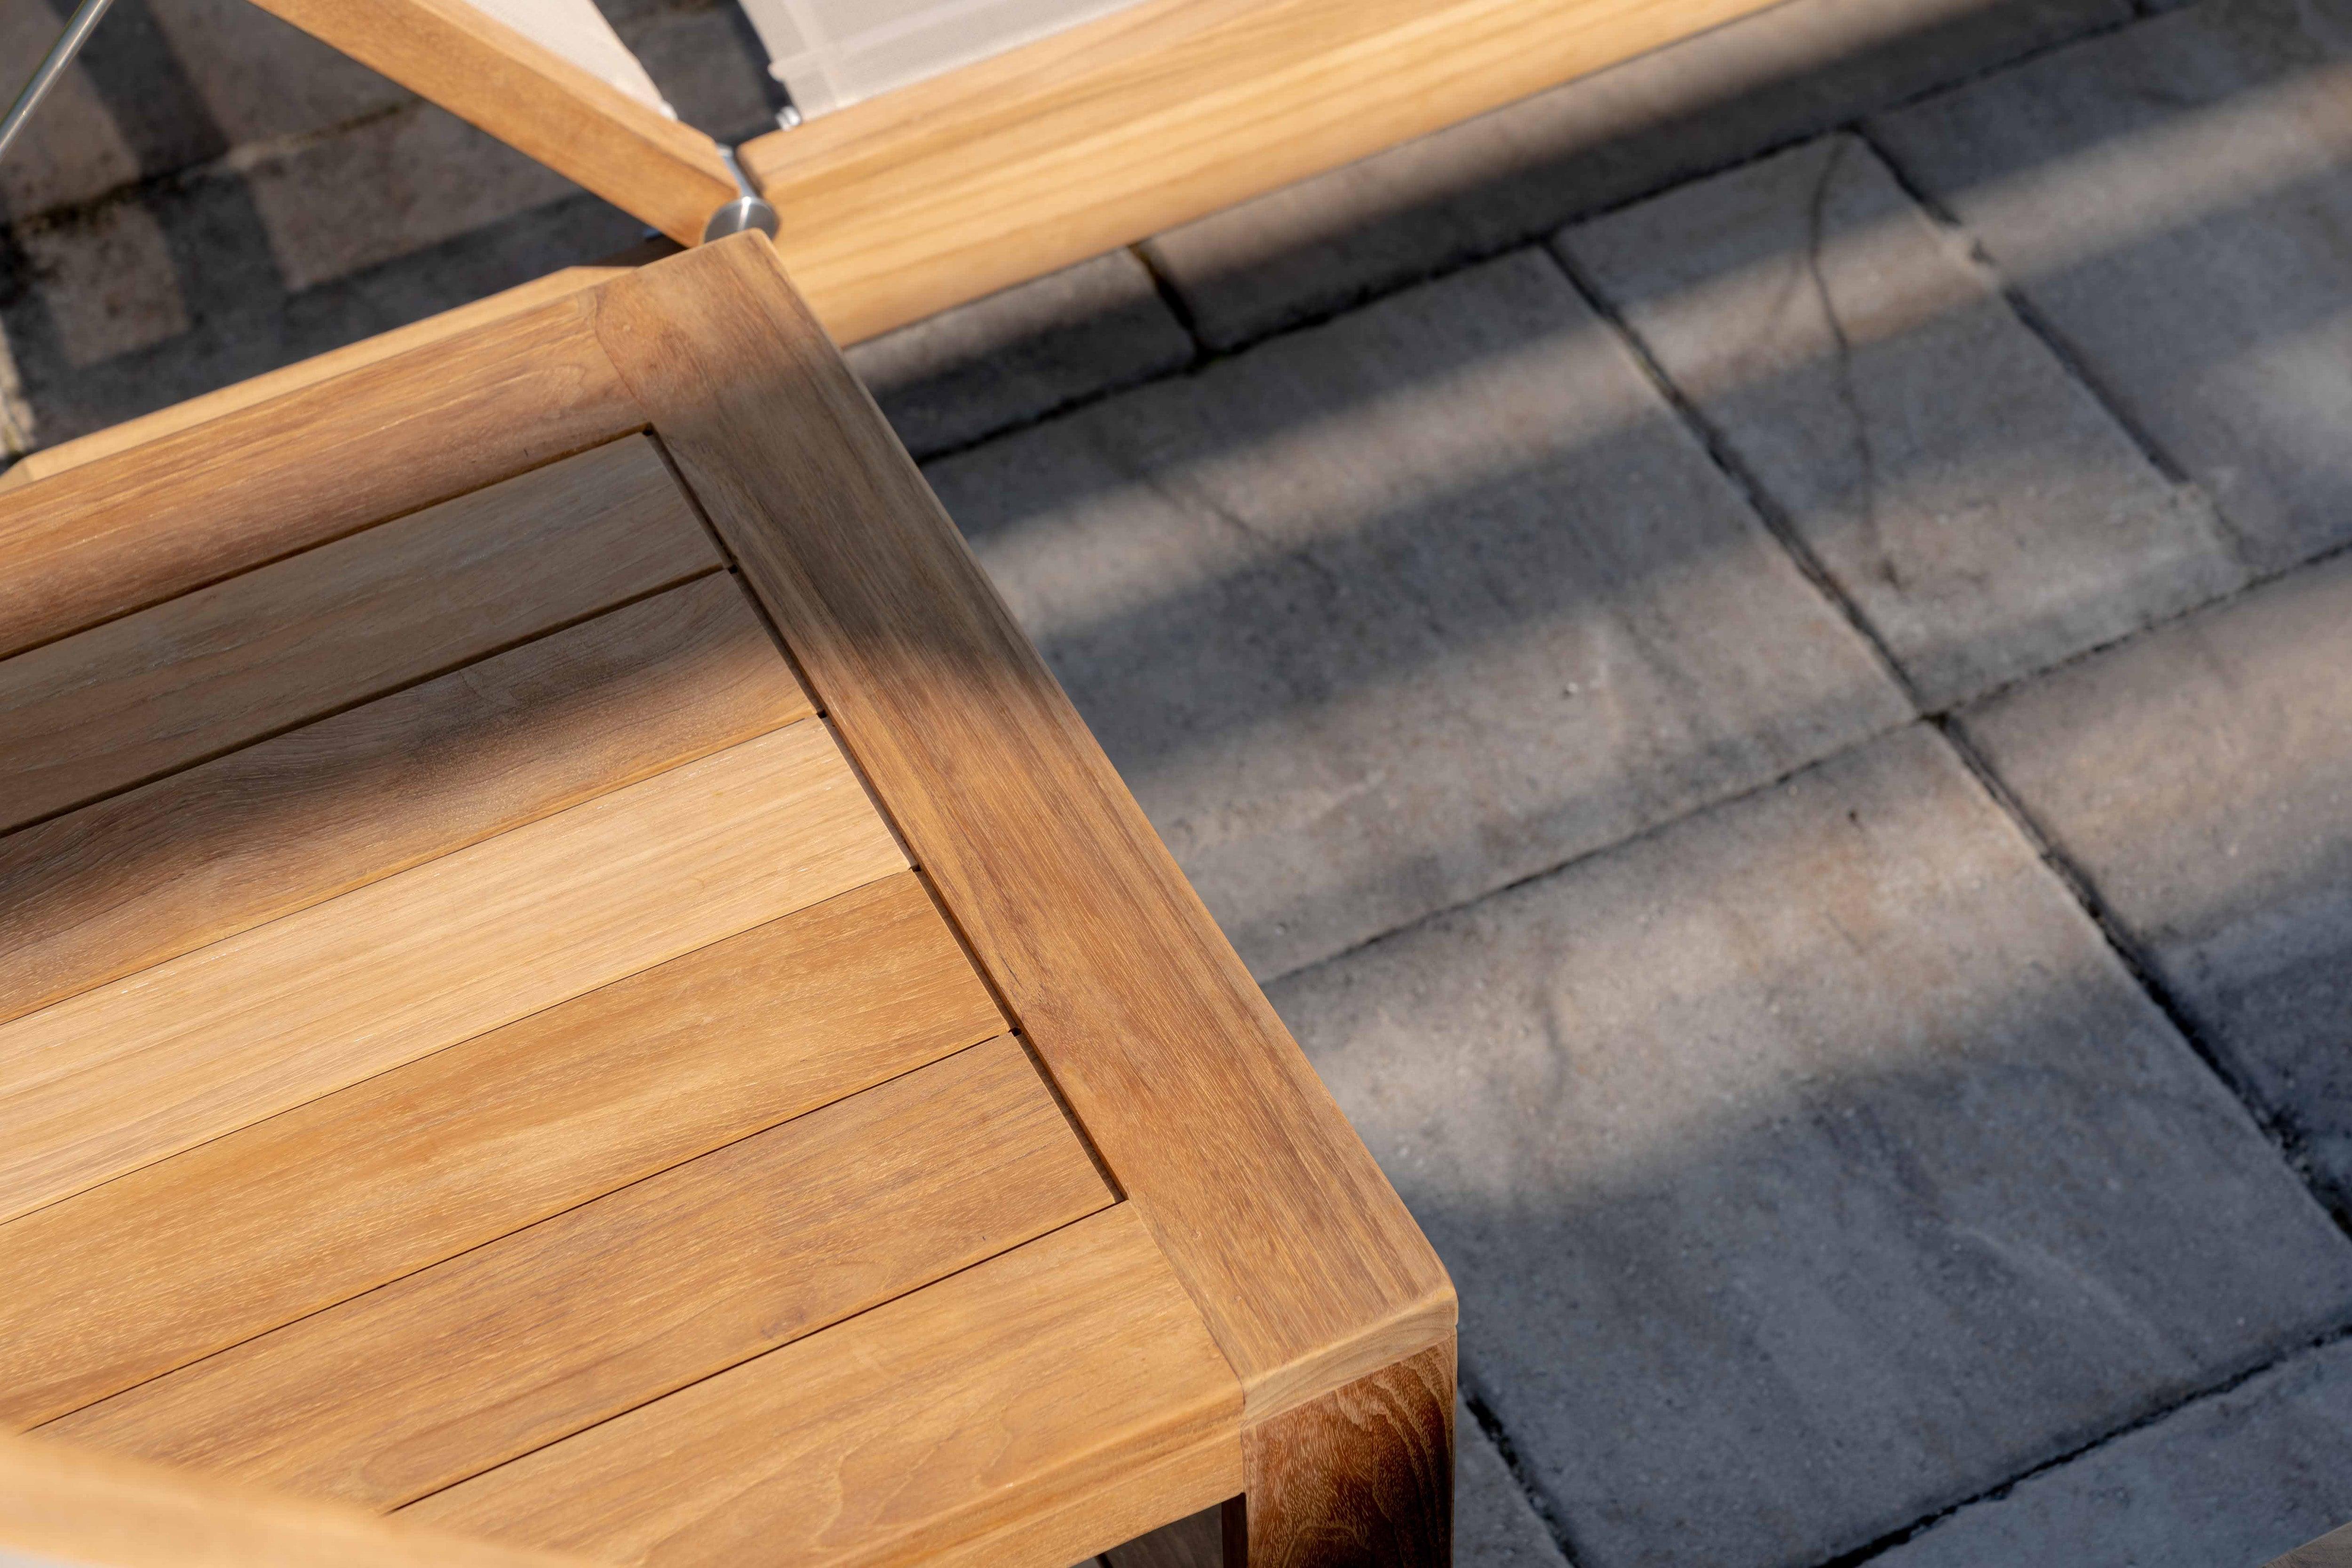 How to Waterproof Wood Furniture for Outdoors